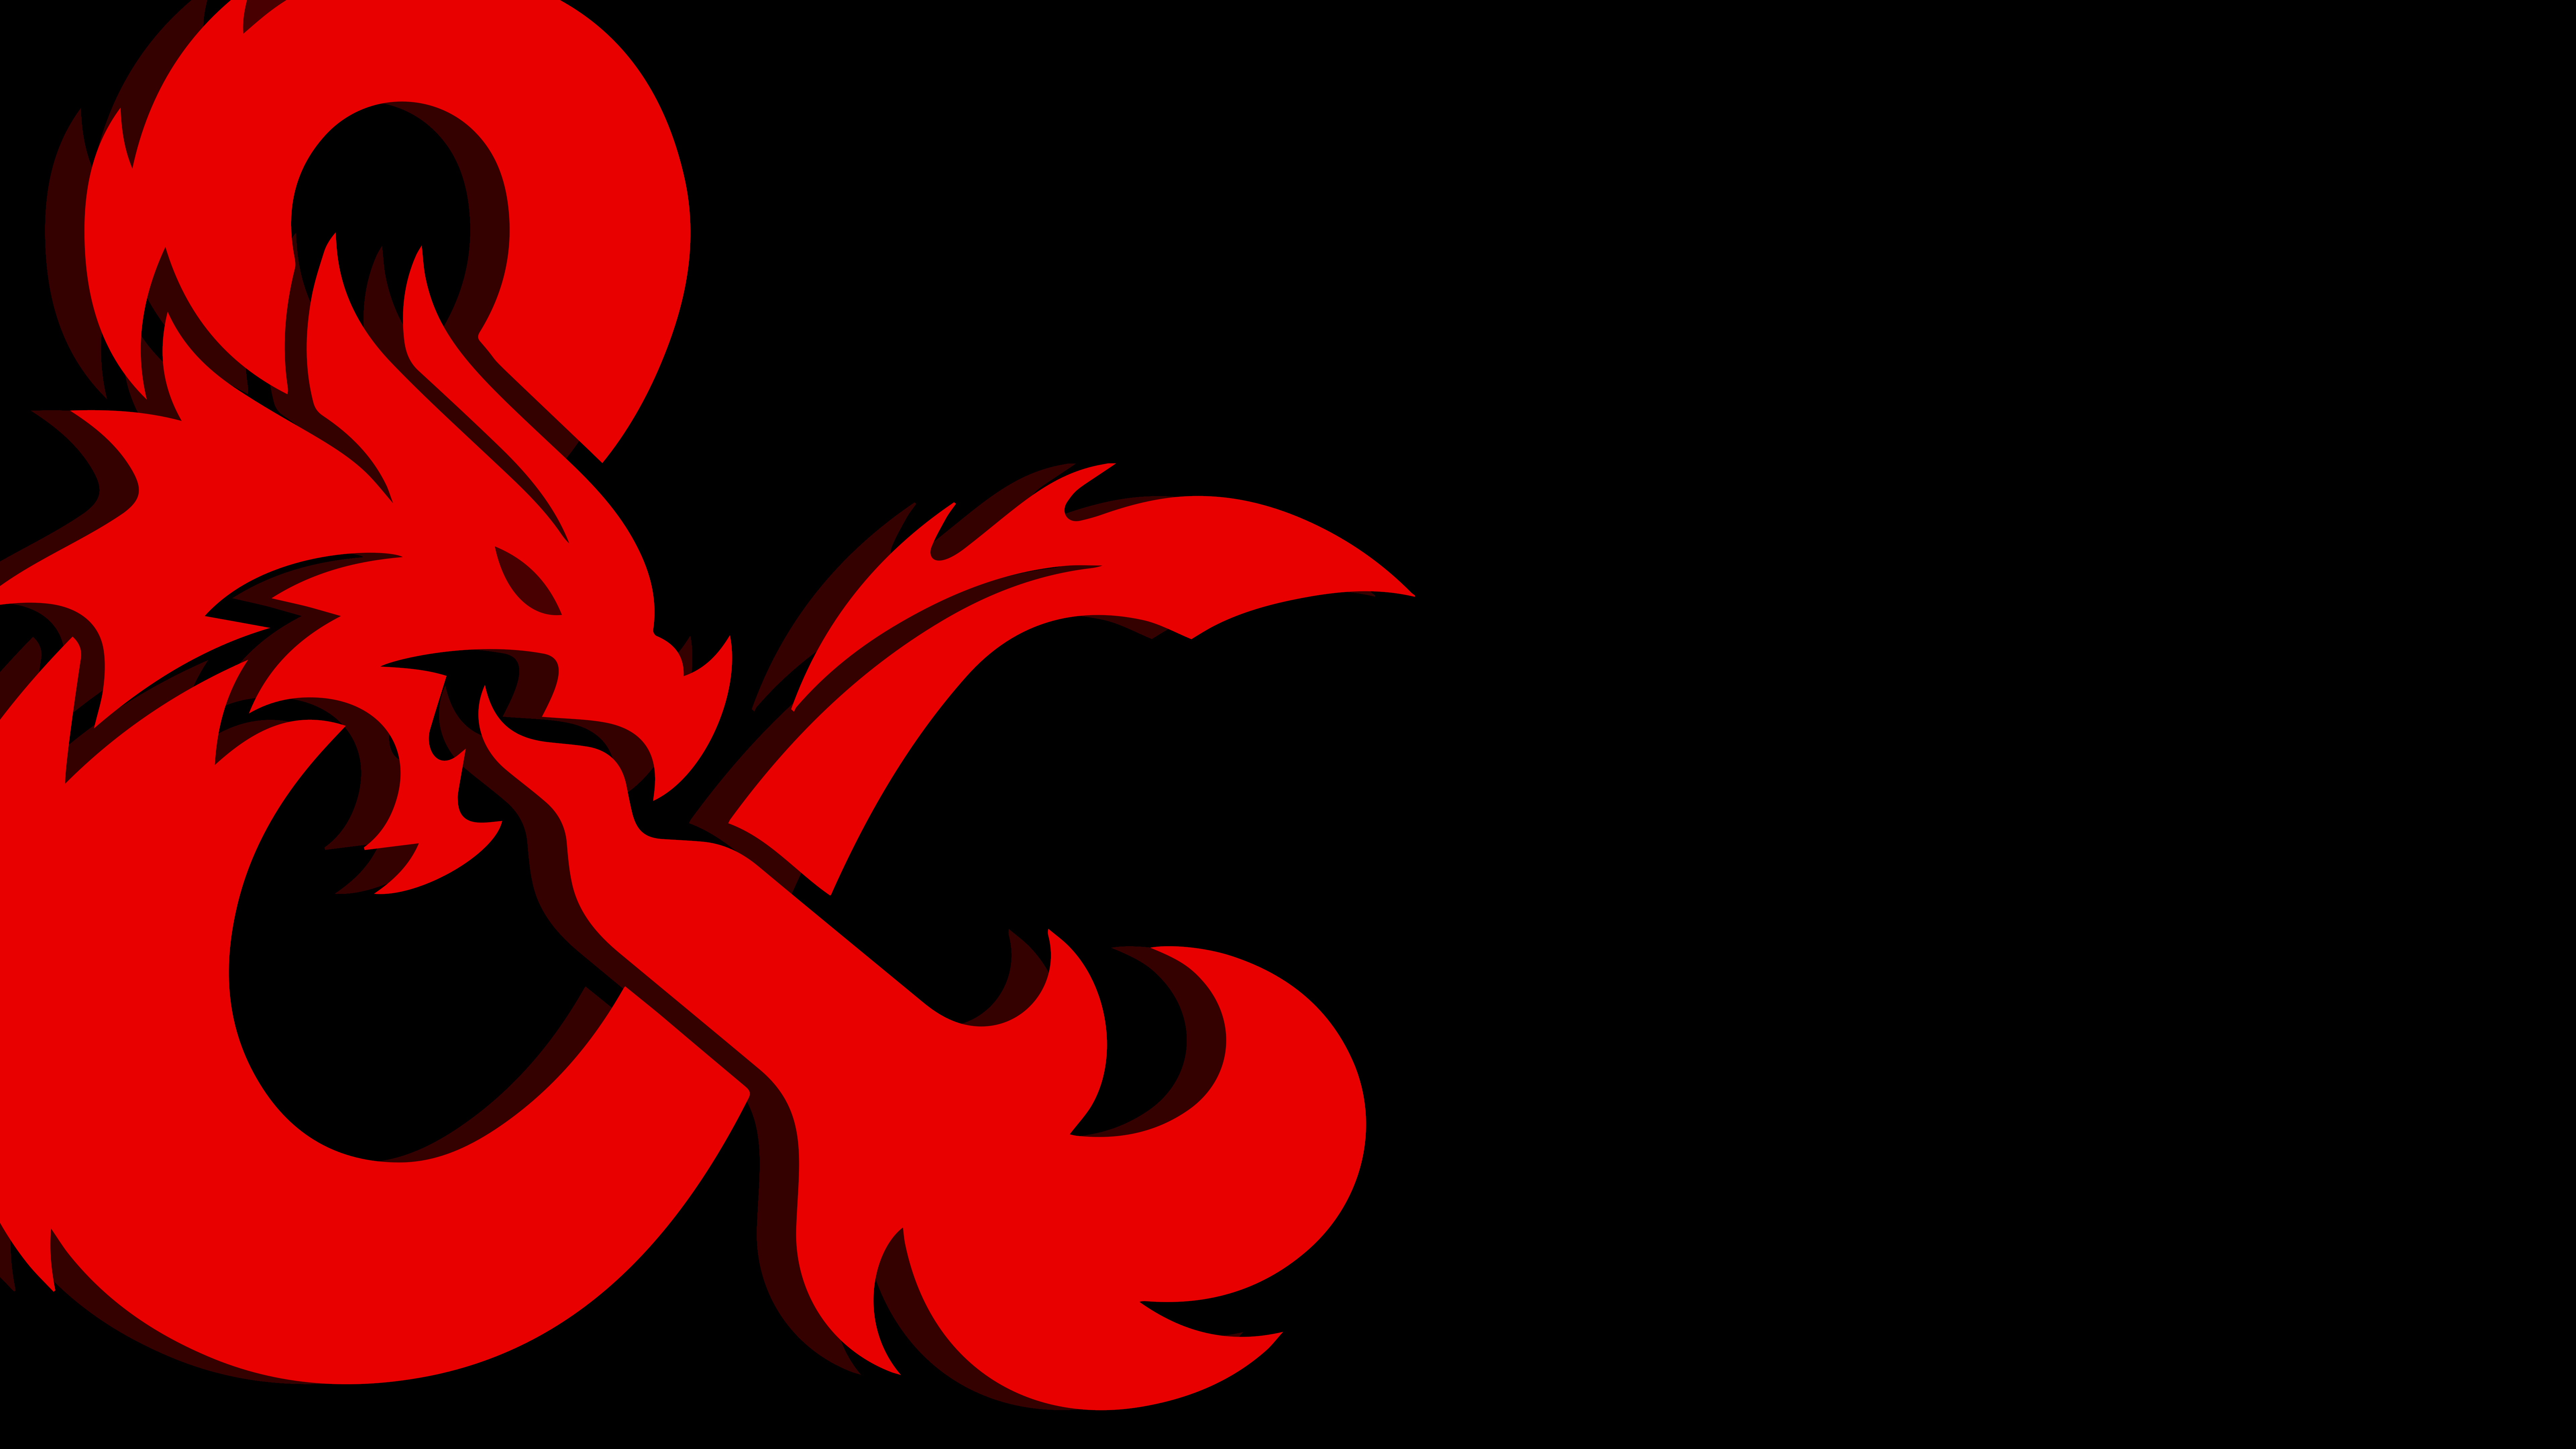 General 7680x4320 dragon red black Ampersand Wizards of the Coast simple background digital art